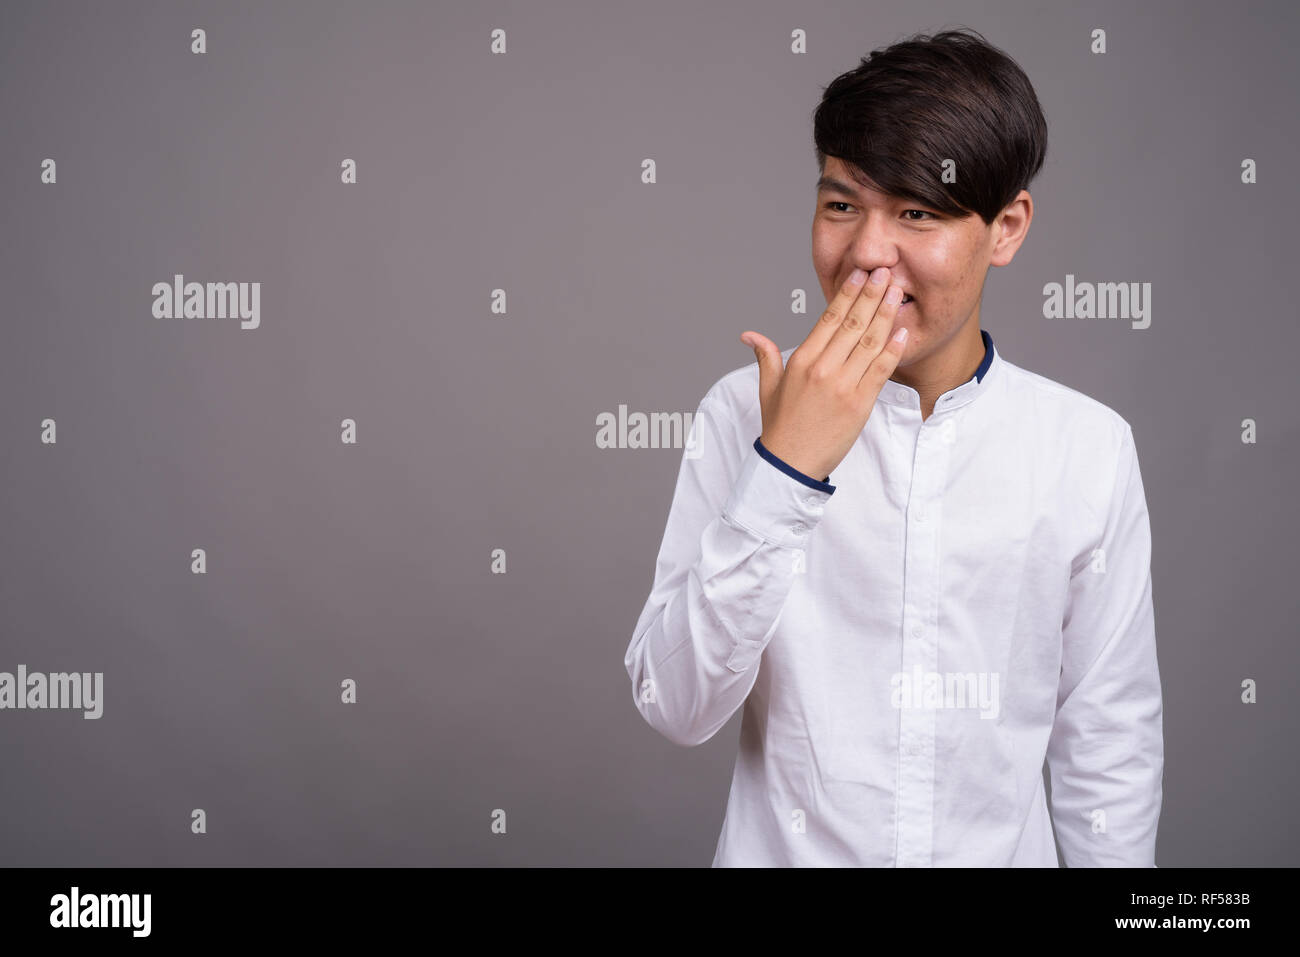 Young Asian teenage boy against gray background Stock Photo